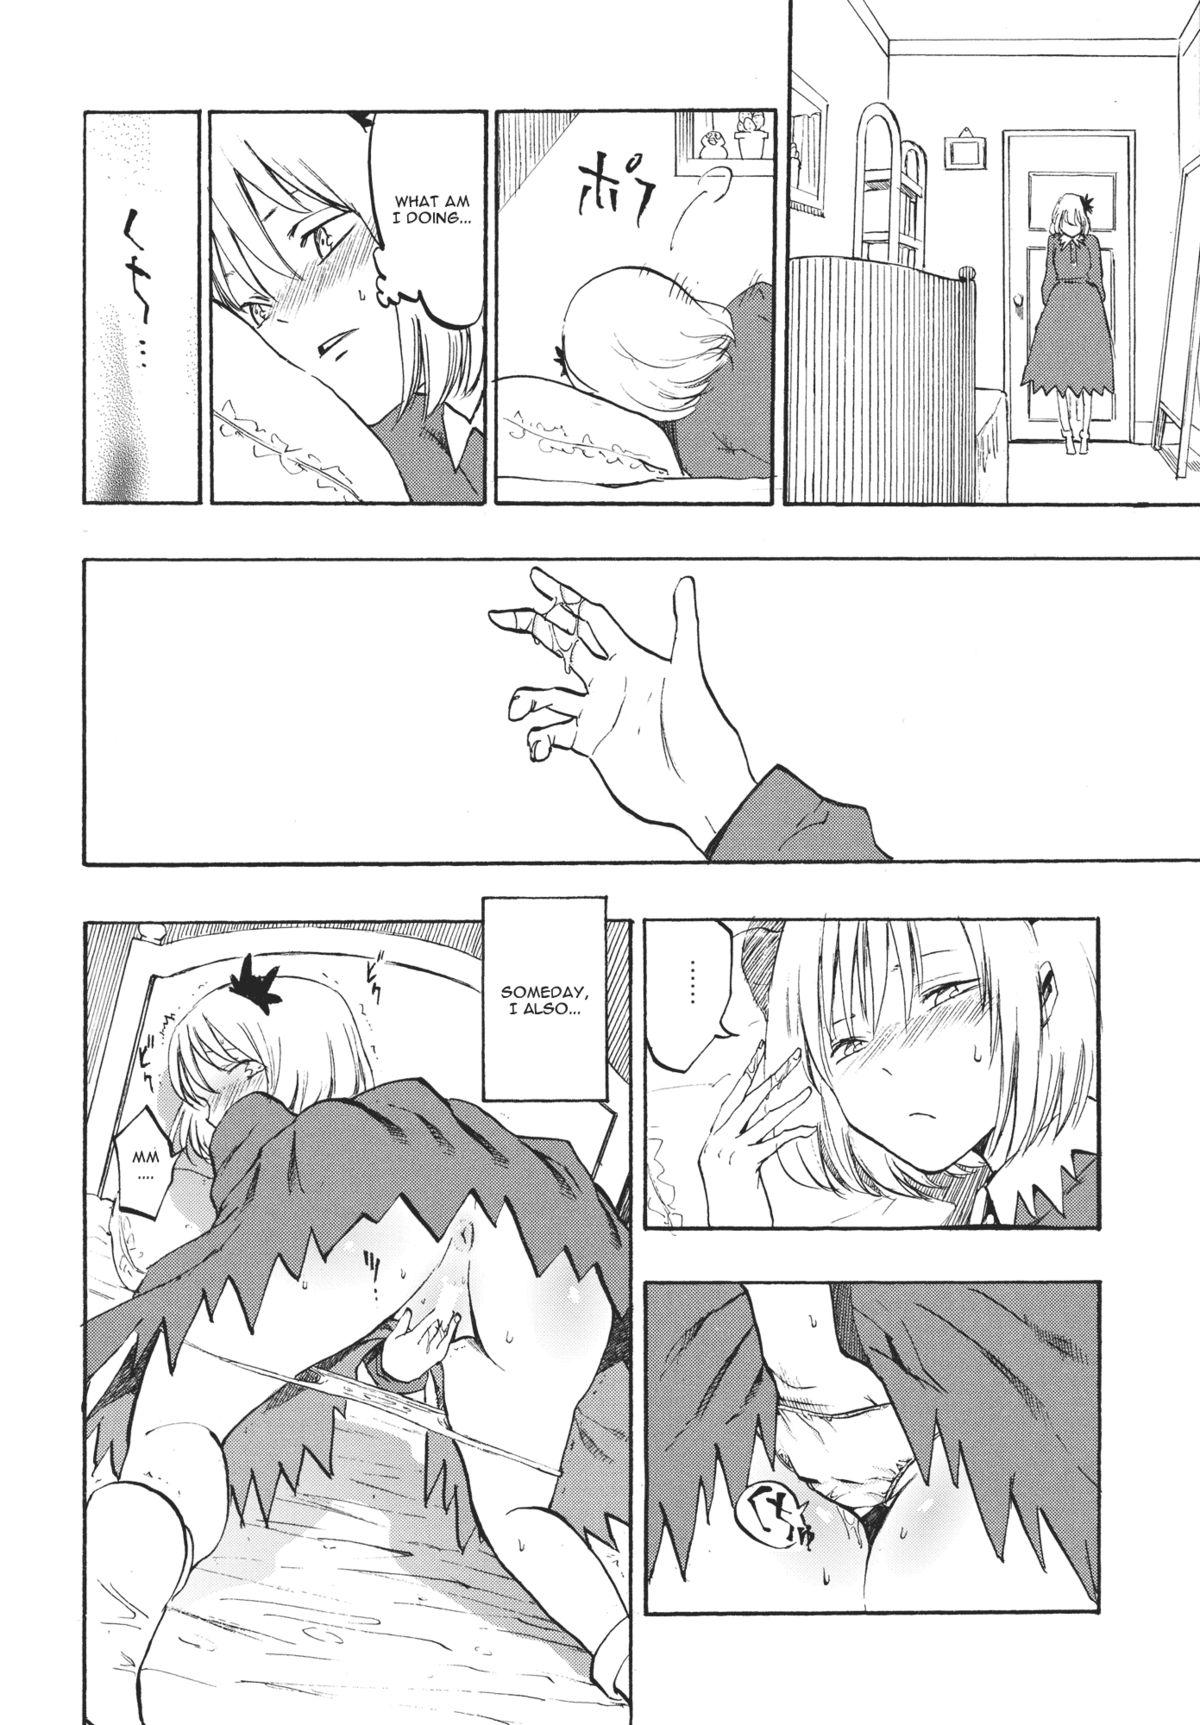 Stepdaughter Ochiba no Yukue - Touhou project Spooning - Page 5